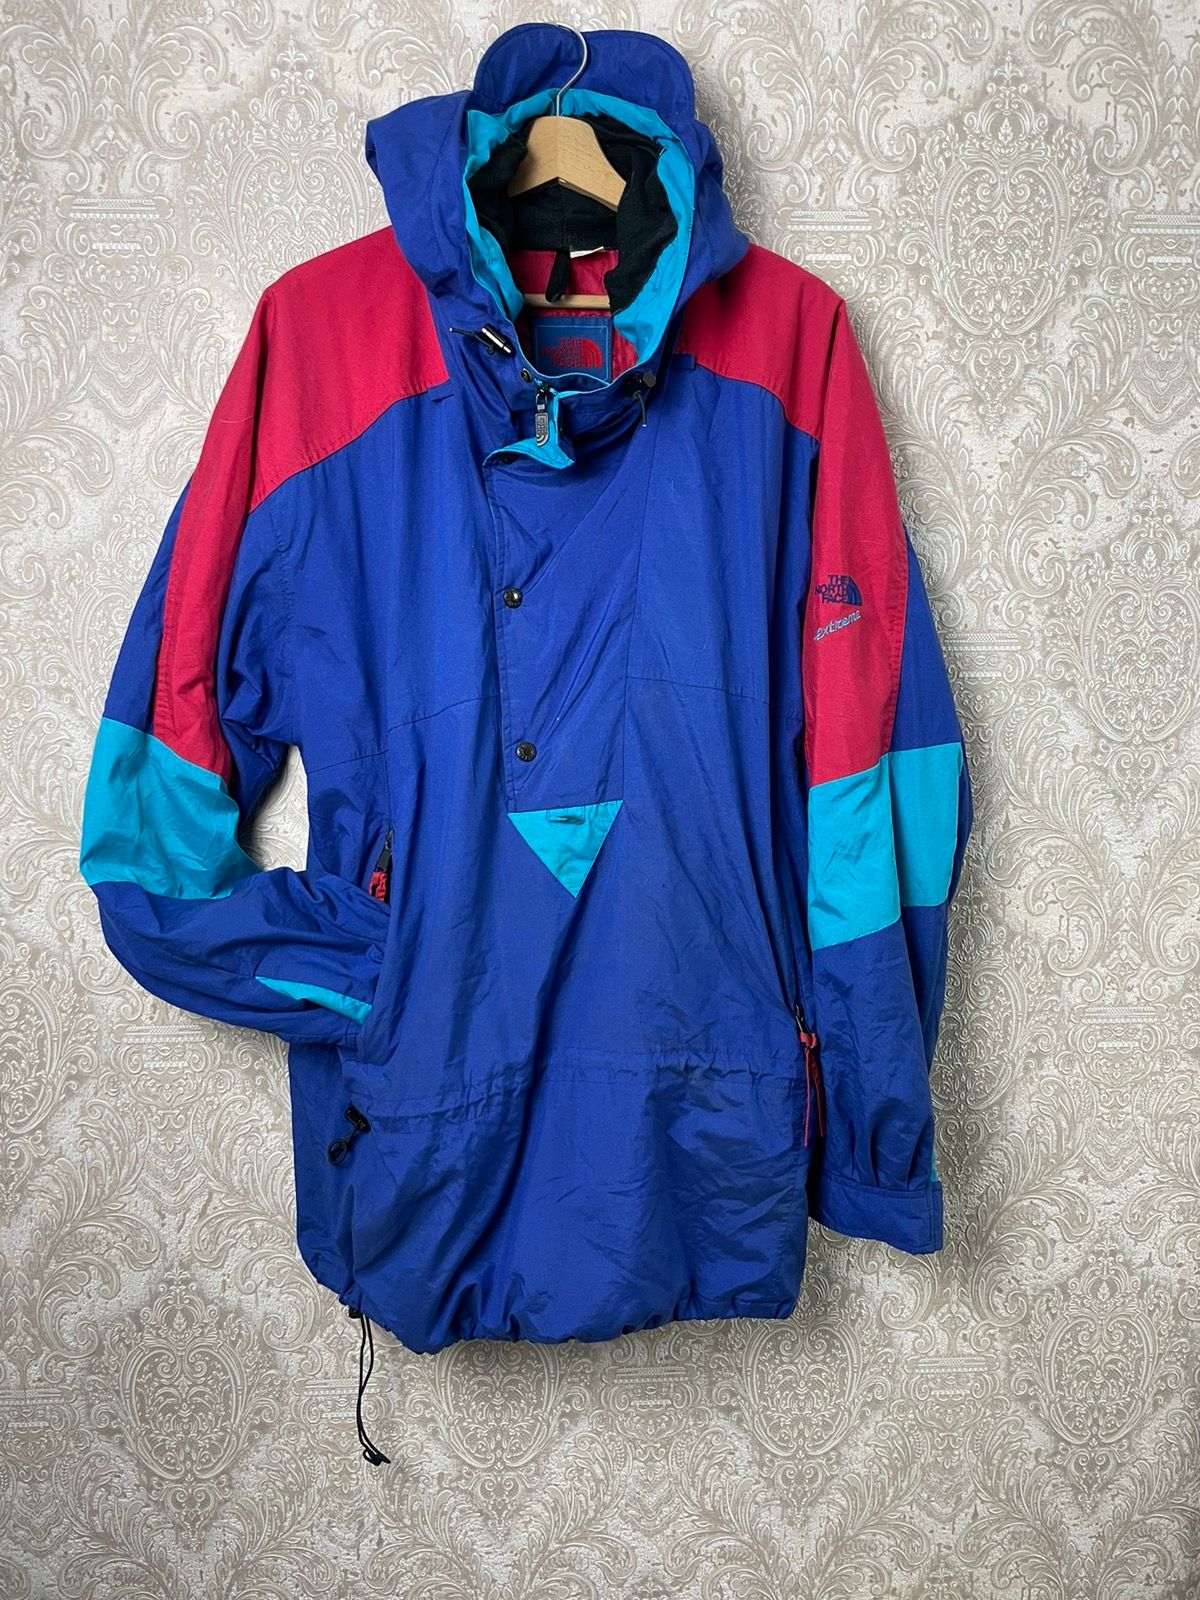 Vintage The North Face Vintage Extreme Jacket anorak | Grailed